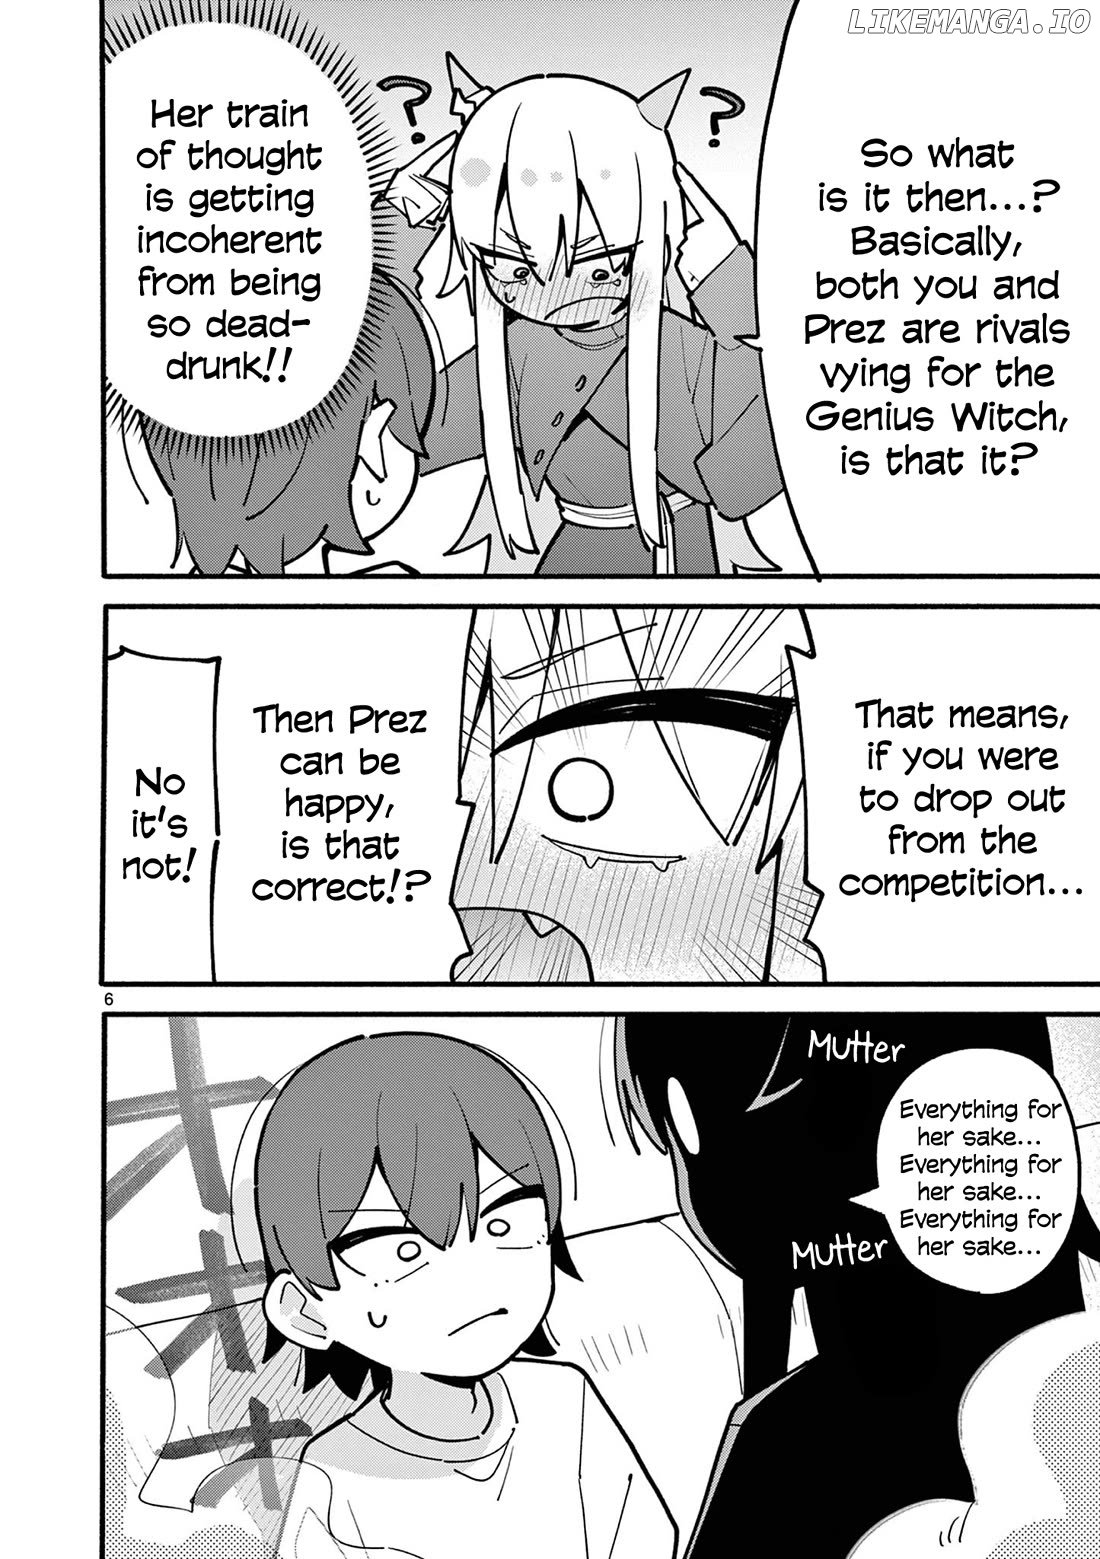 The Genius Witch Lost MP Chapter 57 - page 6